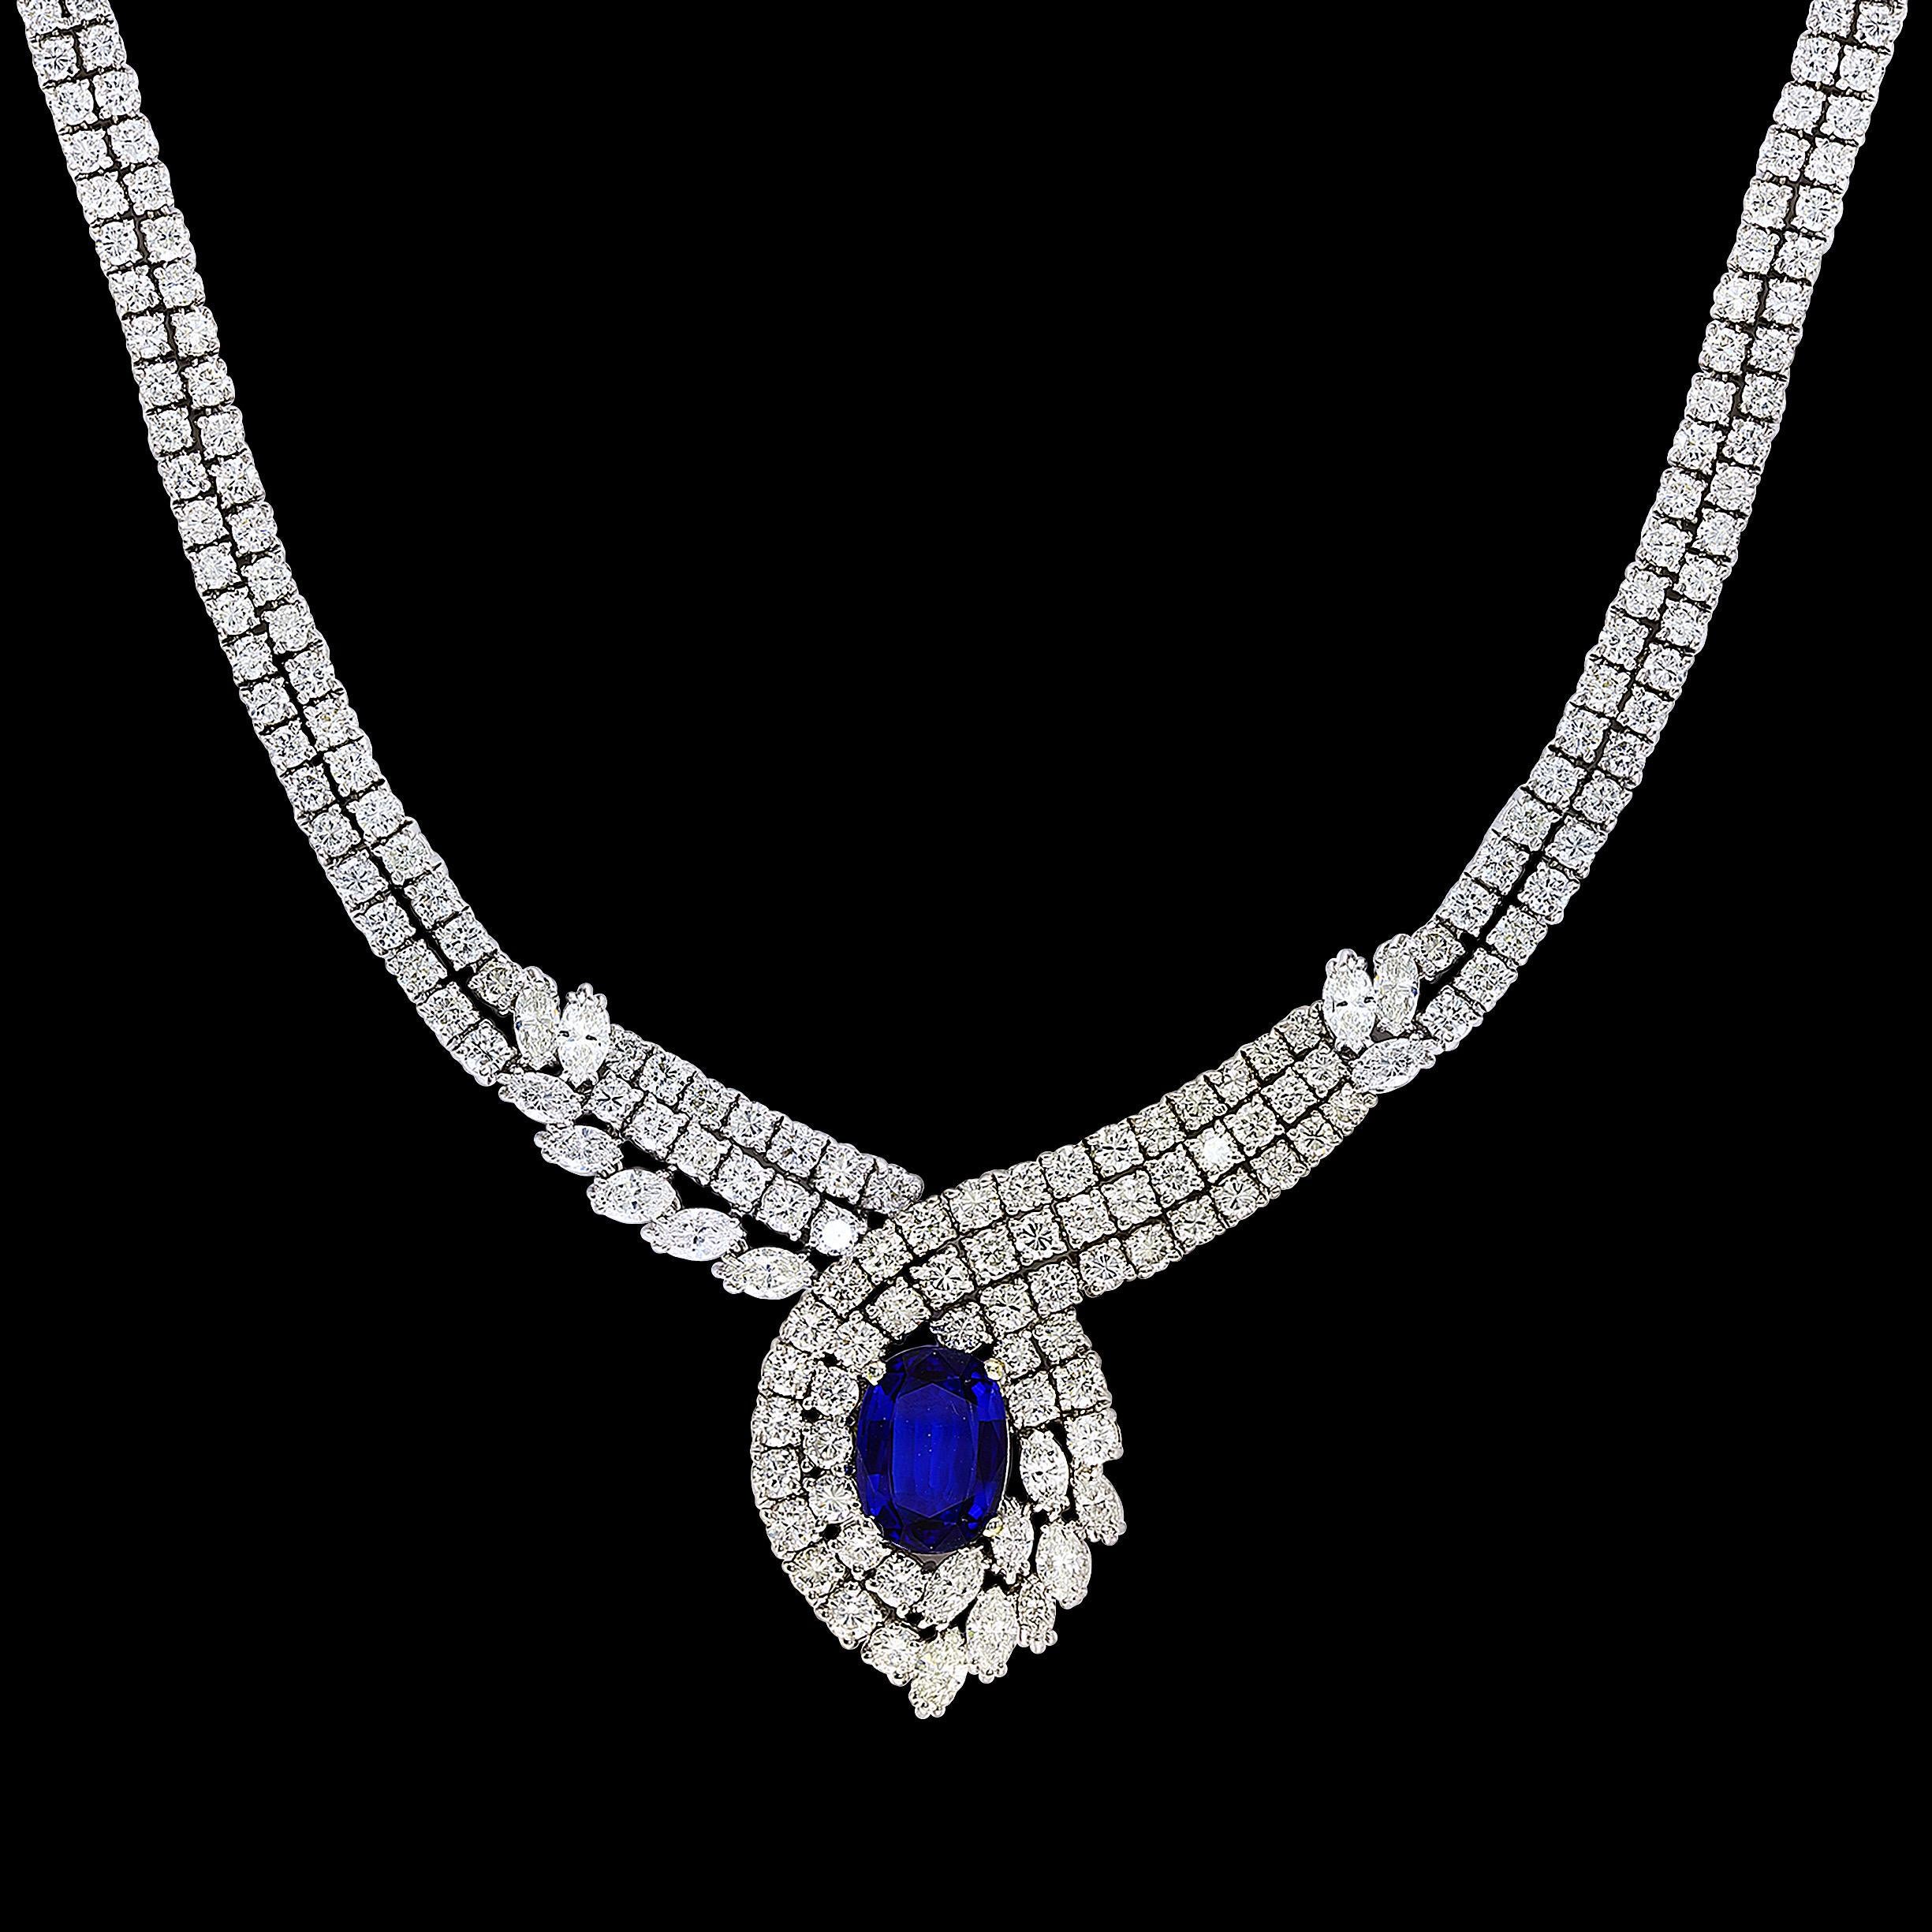 Vintage GIA Certified 6.5 Carat Ceylon Sapphire & 32 Carat Diamond Necklace in  18 Karat  White  Gold , 66 Gm
One of our premium necklace from our Bridal collection.
Approximately 32 carats of VS1 quality of Diamonds all mounted in 18 karat gold.